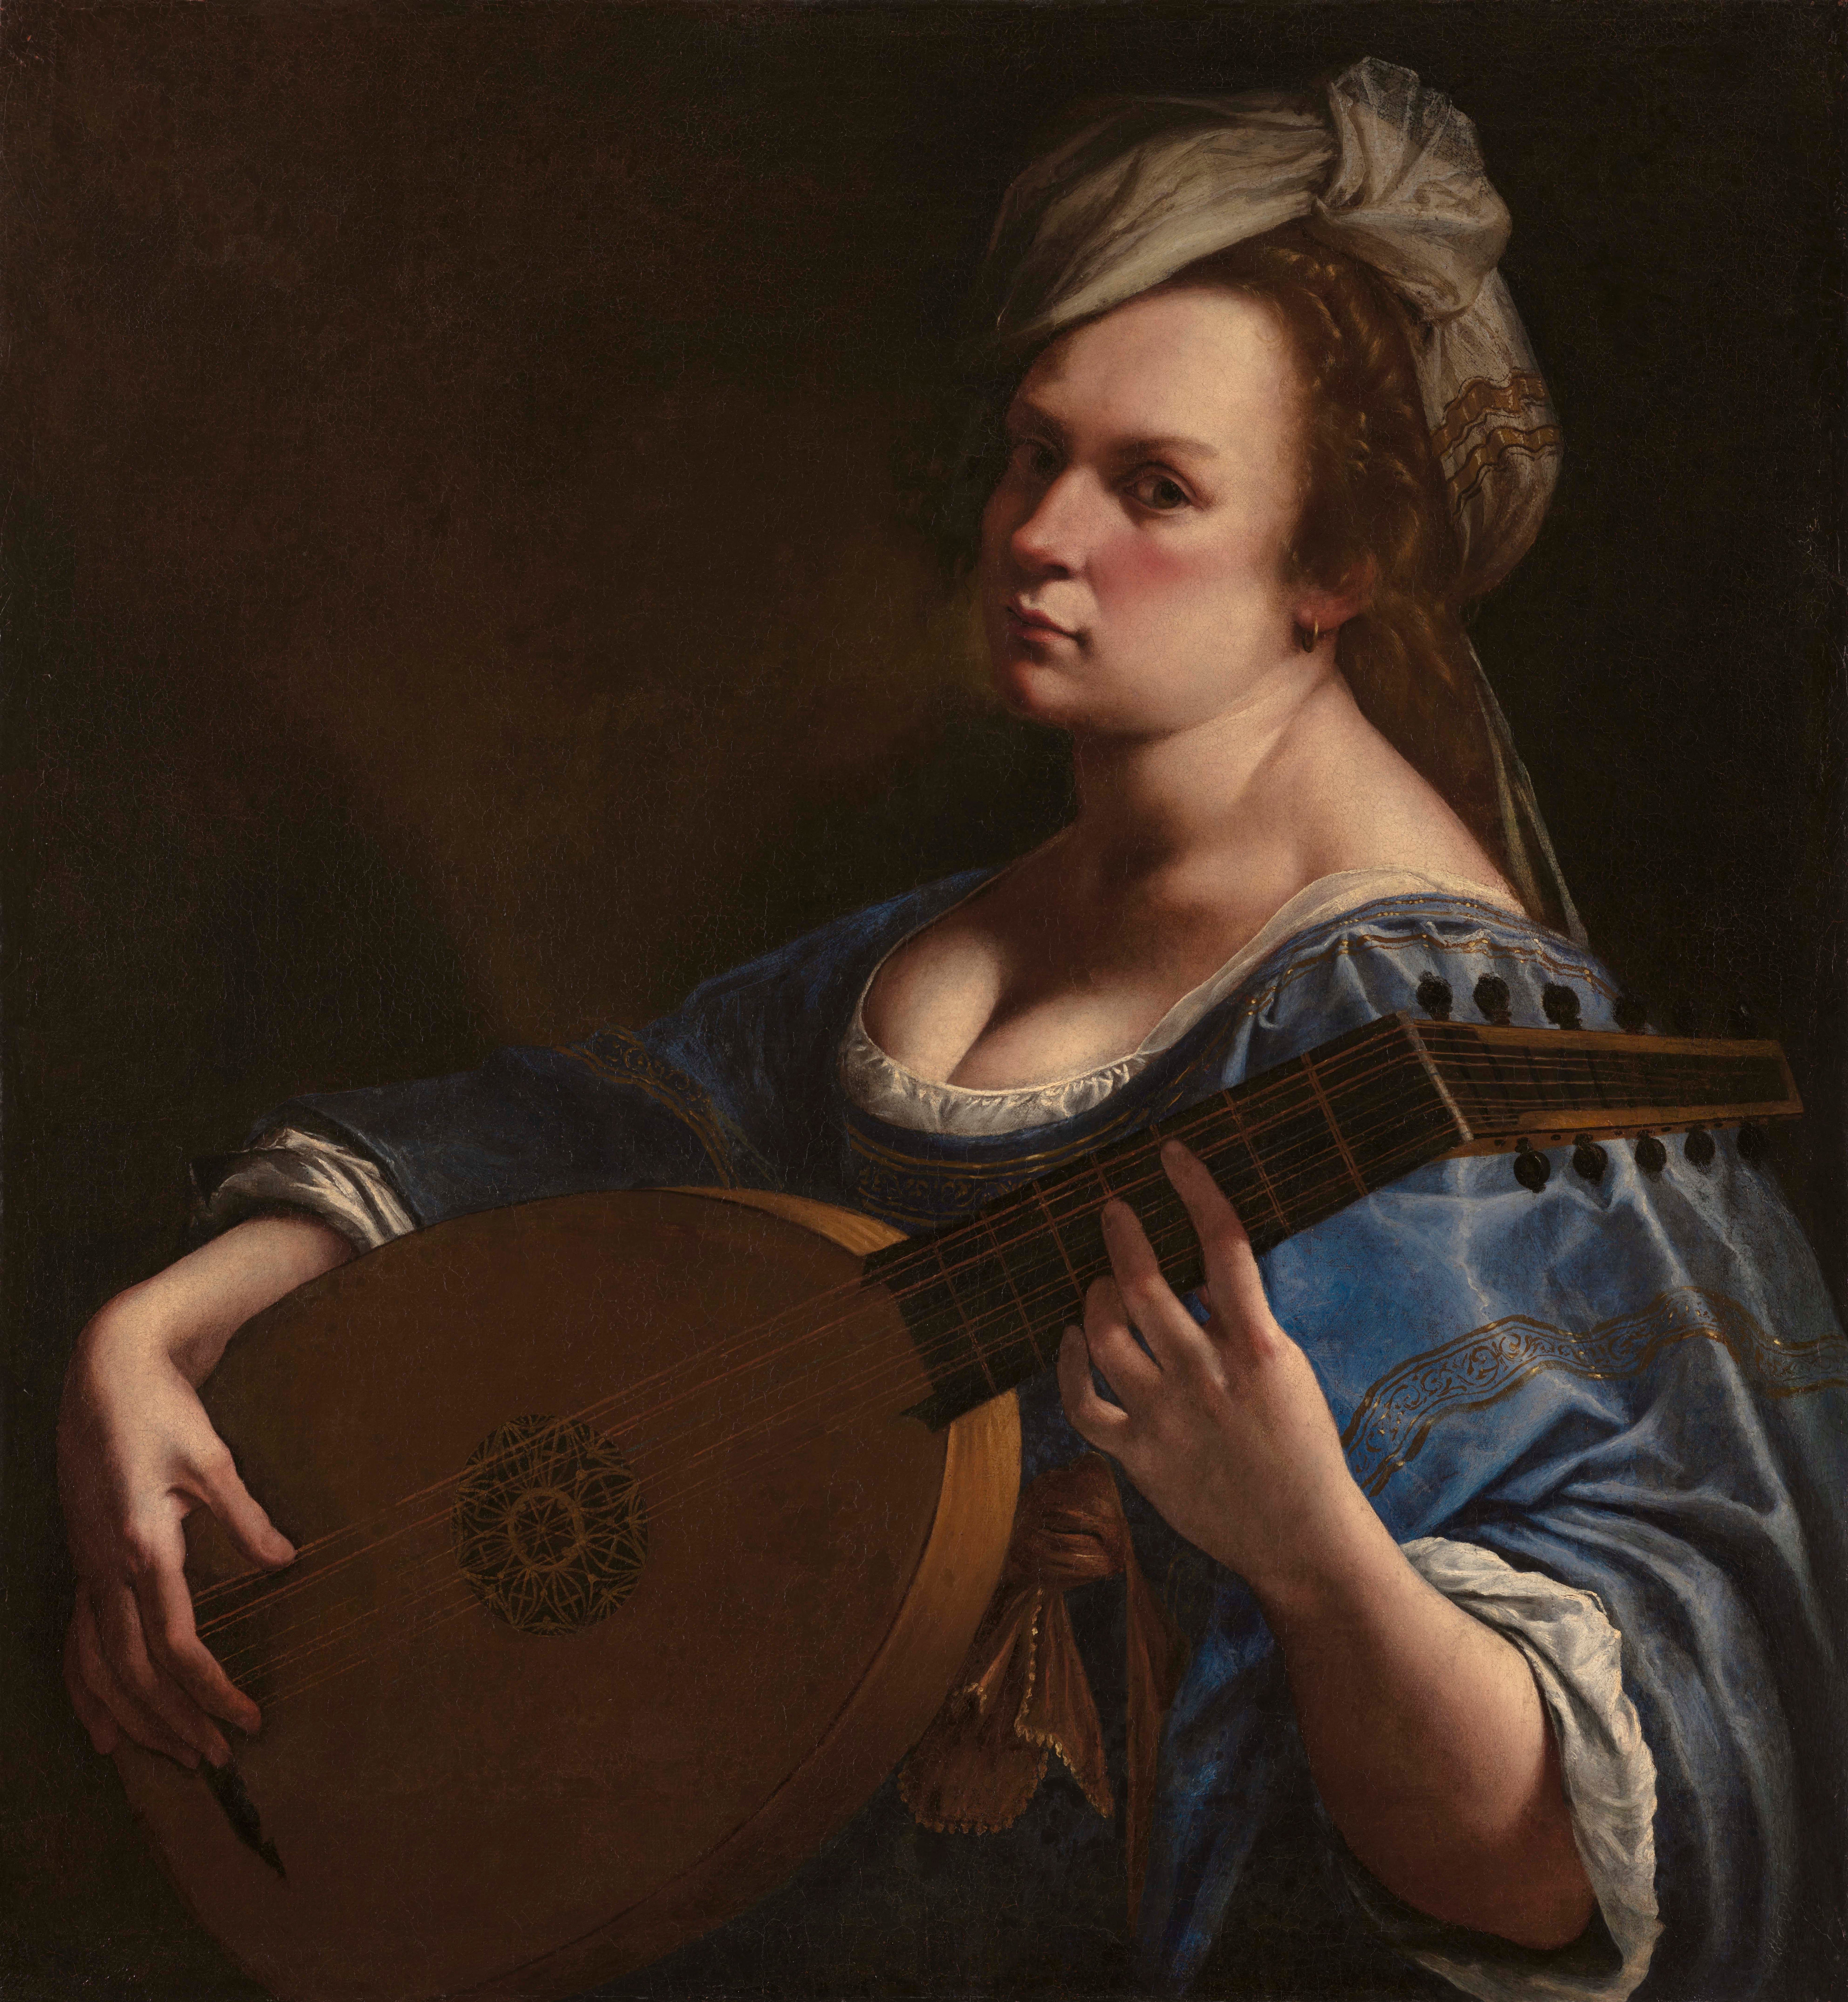 Artemisia Gentileschi (Italian, 1593–1654 or later), "Self-Portrait as a Lute Player," 1615–1617, Oil on canvas. The Wadsworth Atheneum Museum of Art, Charles H. Schwartz Endowment Fund, 2014.4.1